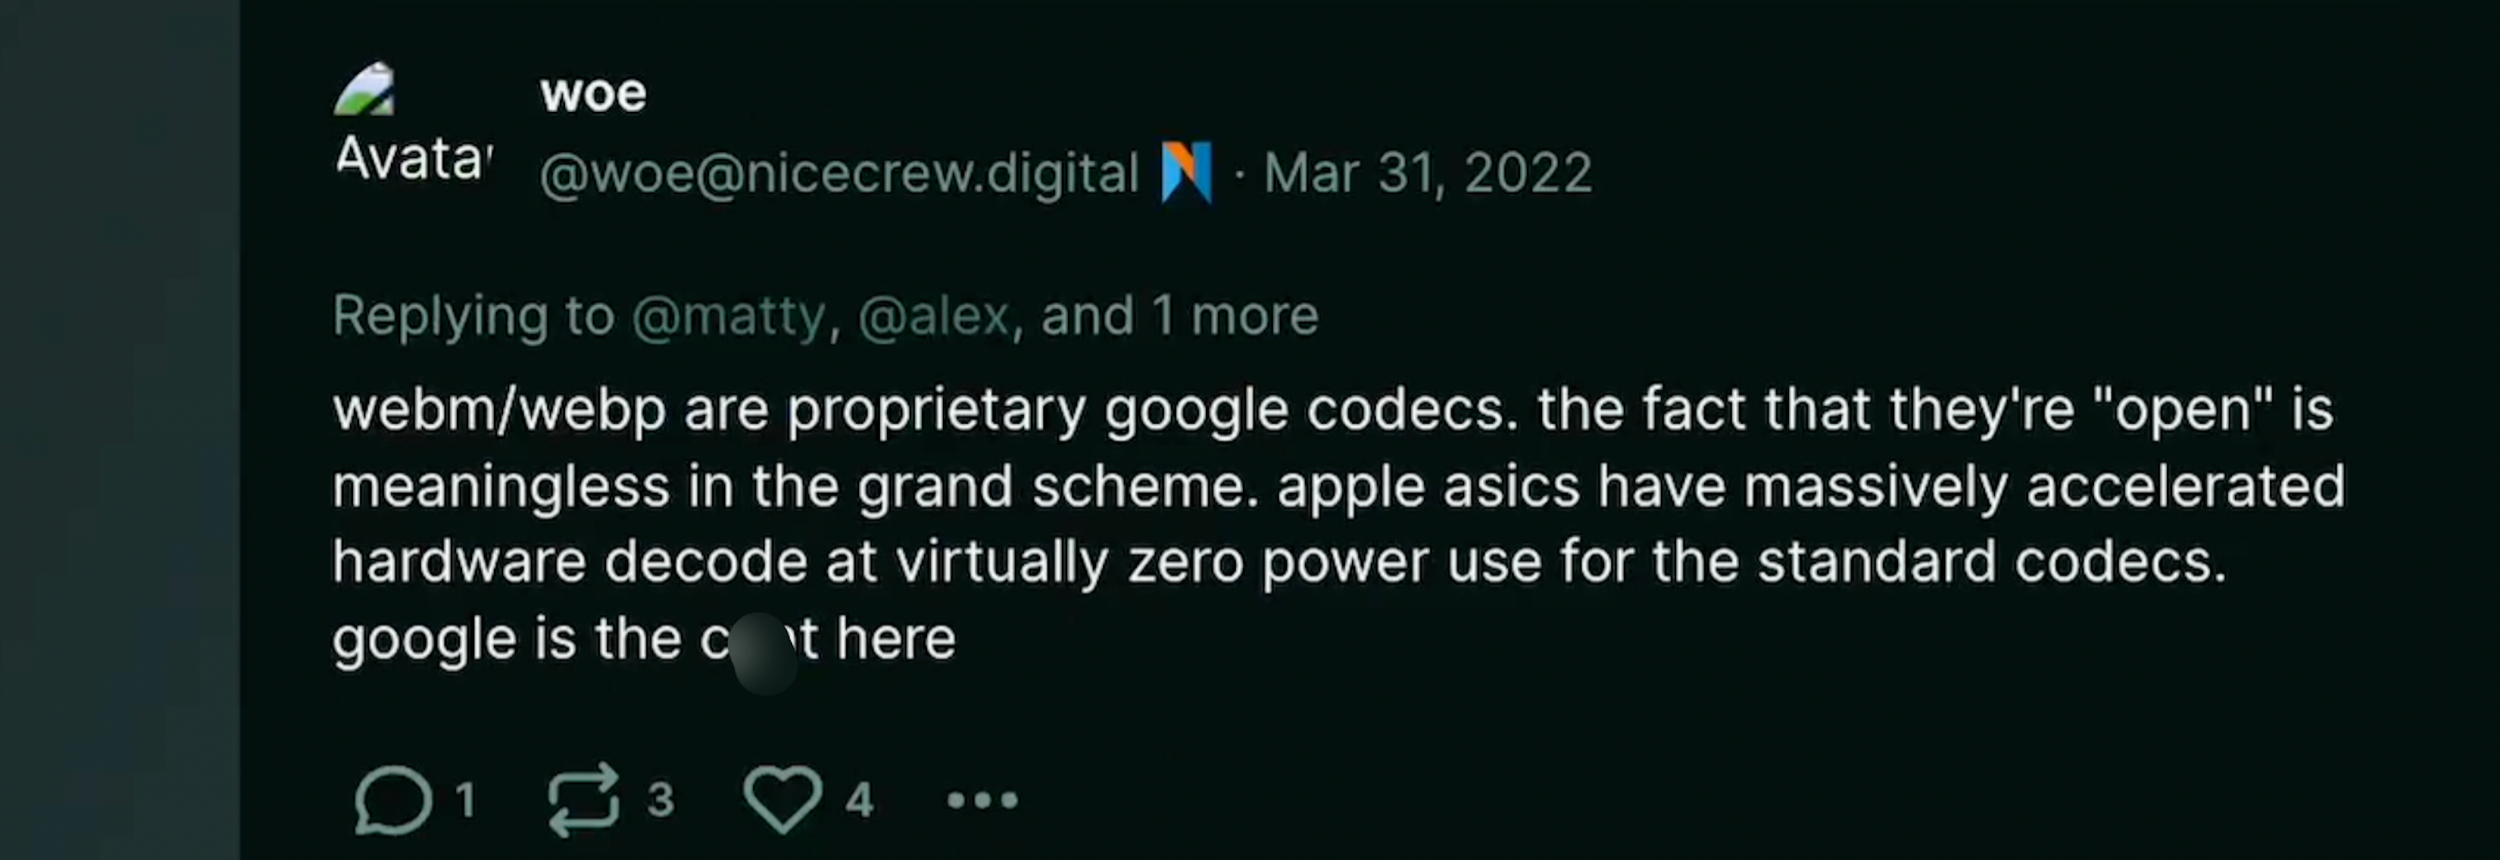 TW: misogyny at end of text. Dumperth on Poast: "webm/webp are proprietary google codecs. the fact that they're 'open' is meaningless in the grand scheme. apple asics have massively accelerated hardware decode at virtually zero power use for the standard codecs. google is the c*nt here."